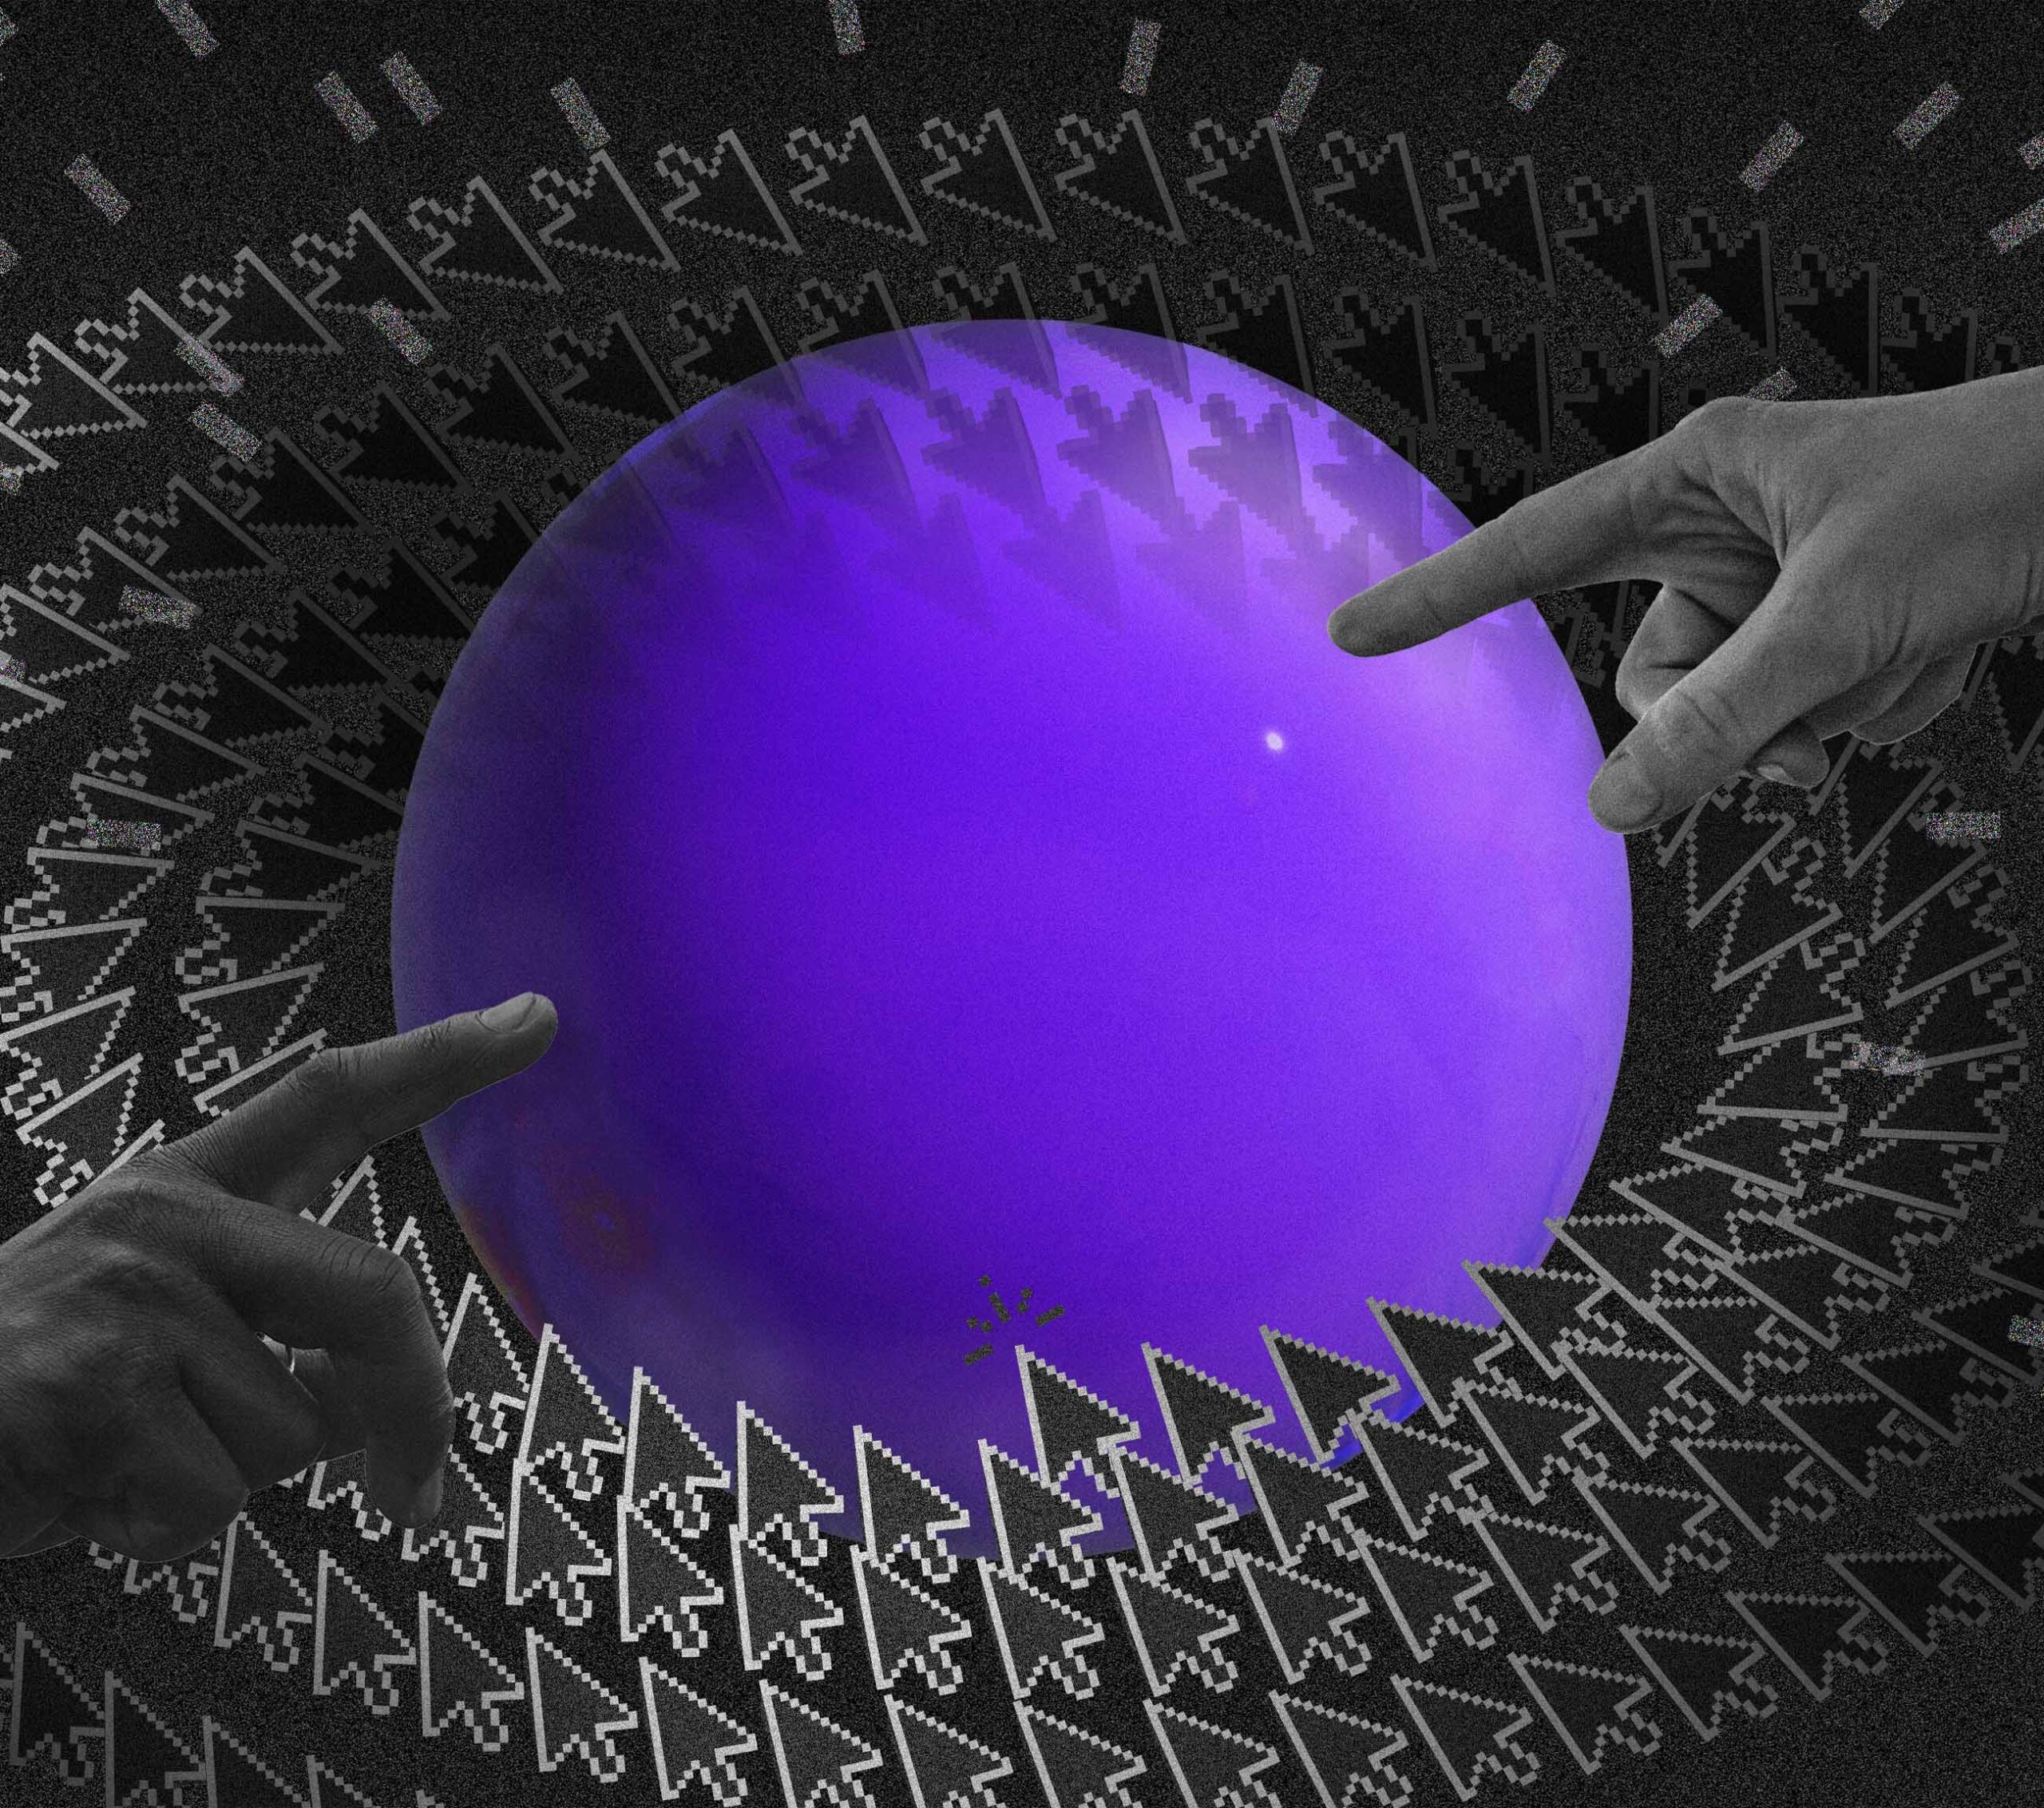 Two hands about to pop a large purple bubble surrounded by a vortex of mouse cursors.